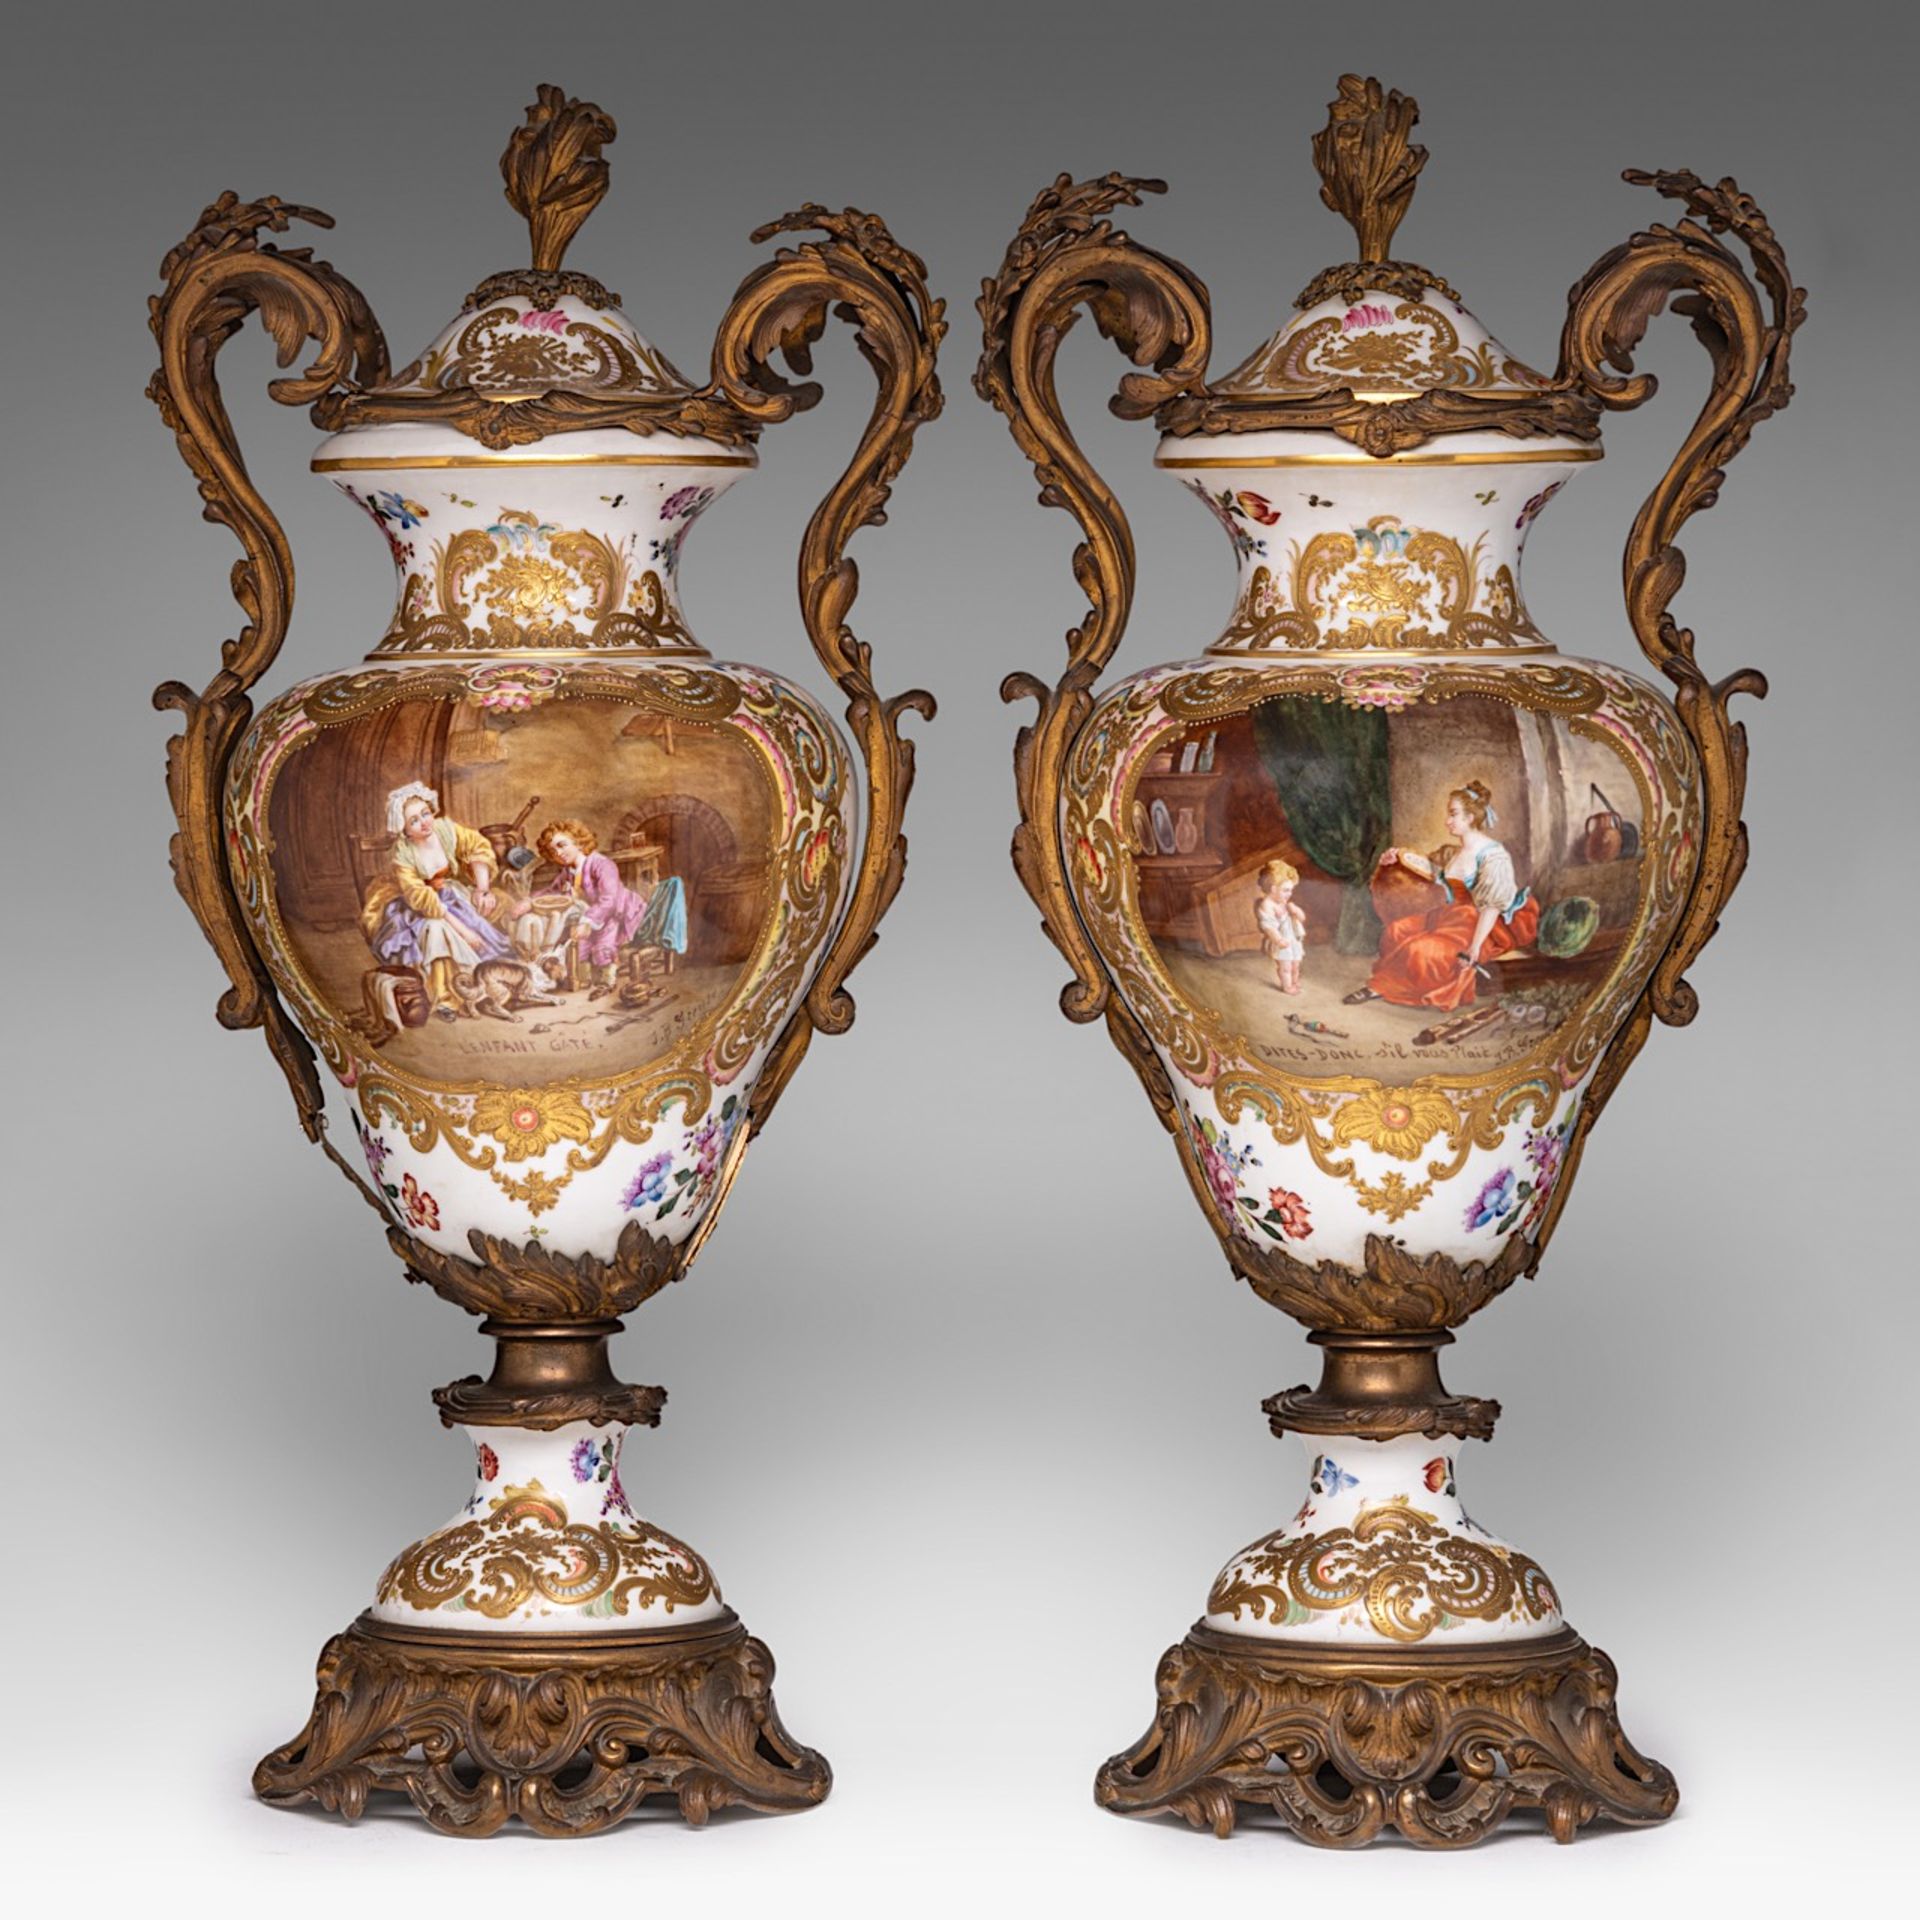 An imposing pair of Rococo Revival porcelain vases with hand-painted scenes after Jean-Baptiste Greu